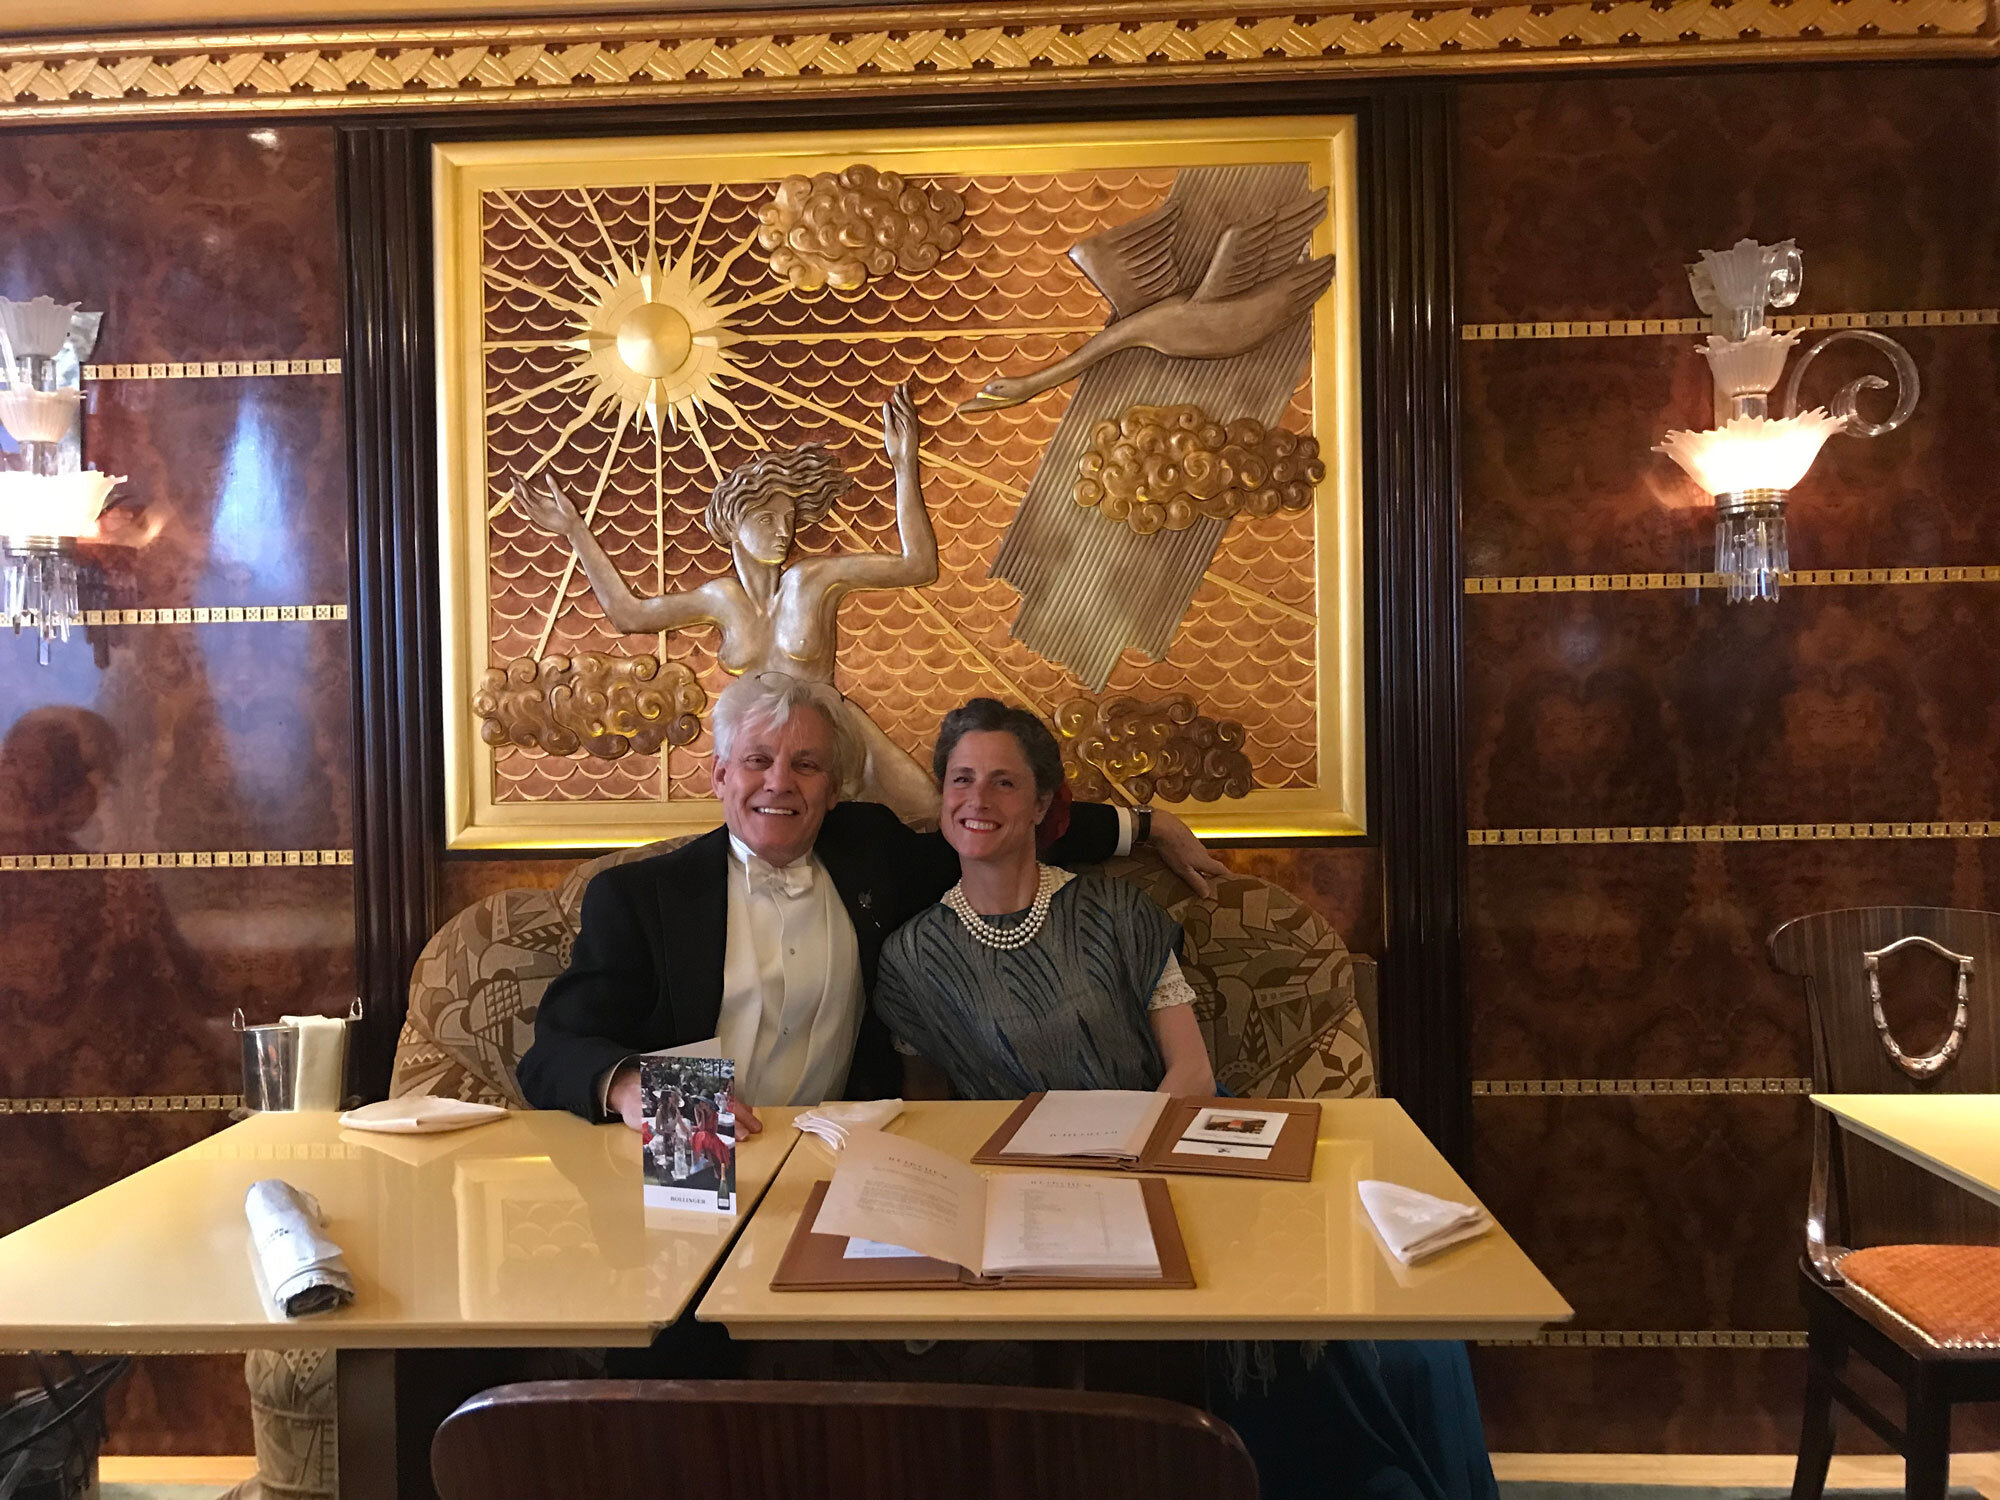  At the Ritz with Fiona San Giuliano before the Royal Academy Dinner, 2019 